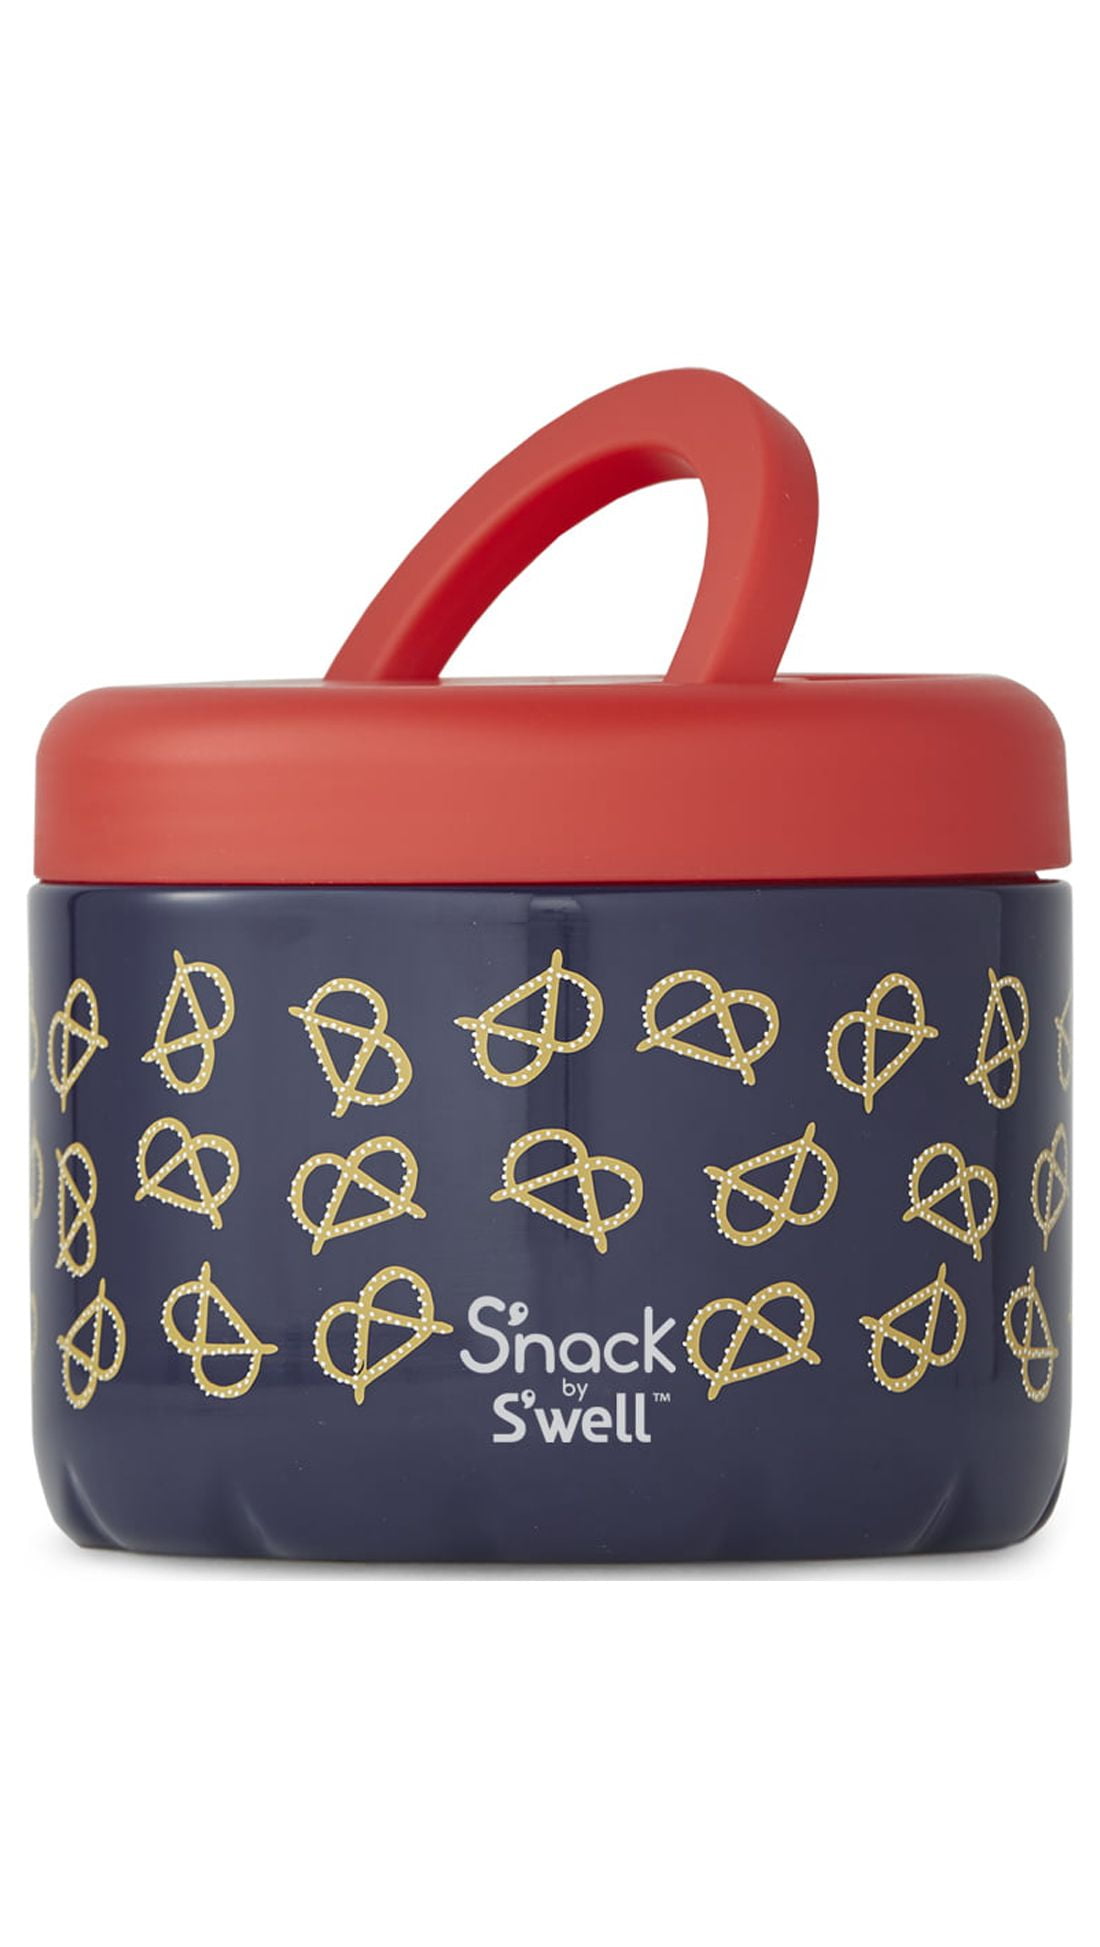 S'nack by S'well Avocado Vacuum-Insulated Stainless Steel Food